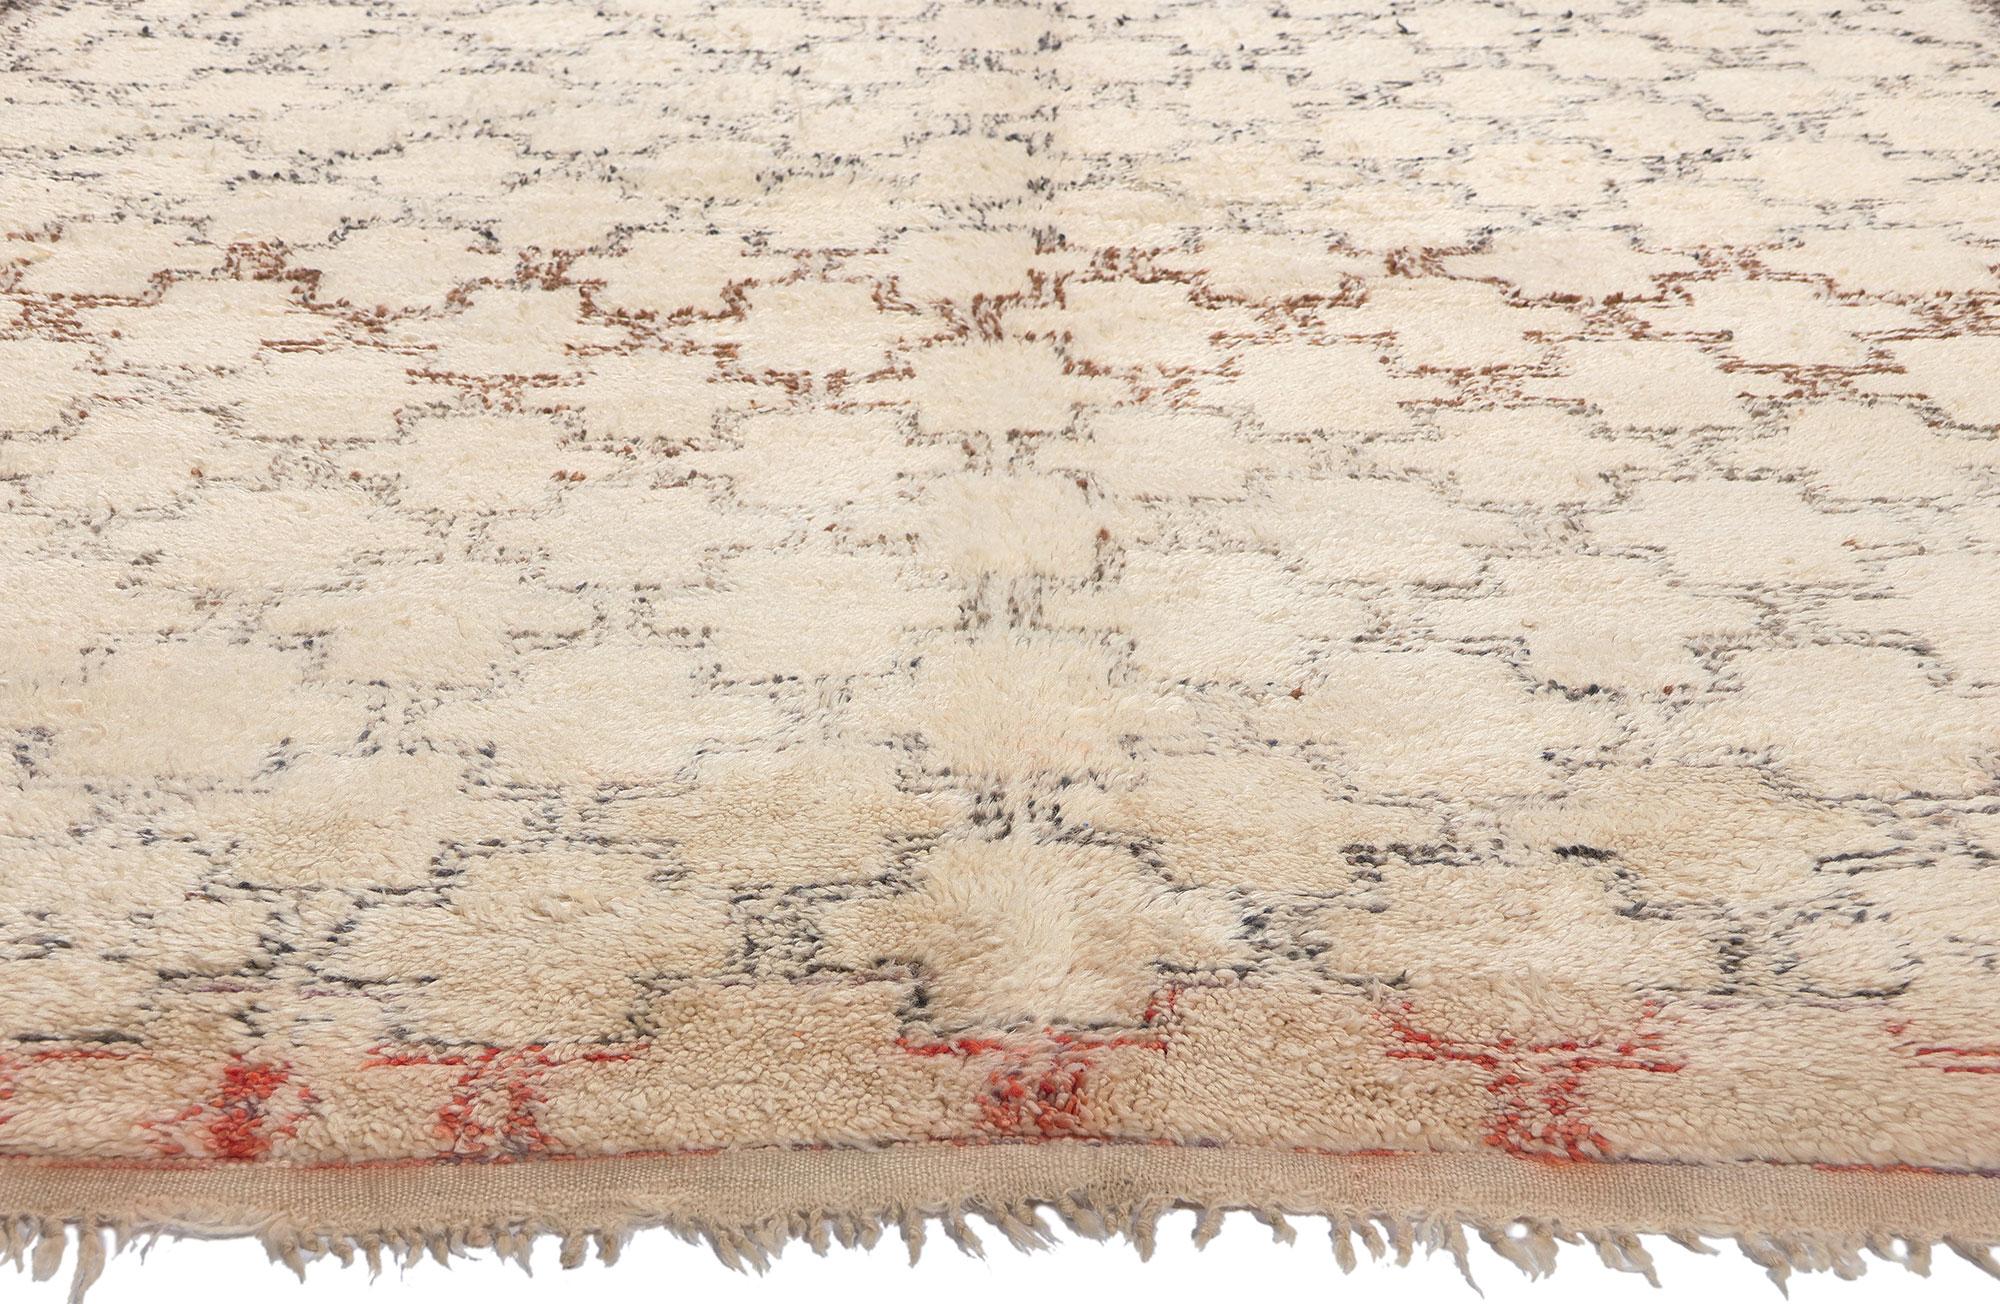 Hand-Knotted Vintage Moroccan Beni Ourain Rug, Midcentury Modern Meets Shibui Hygge For Sale